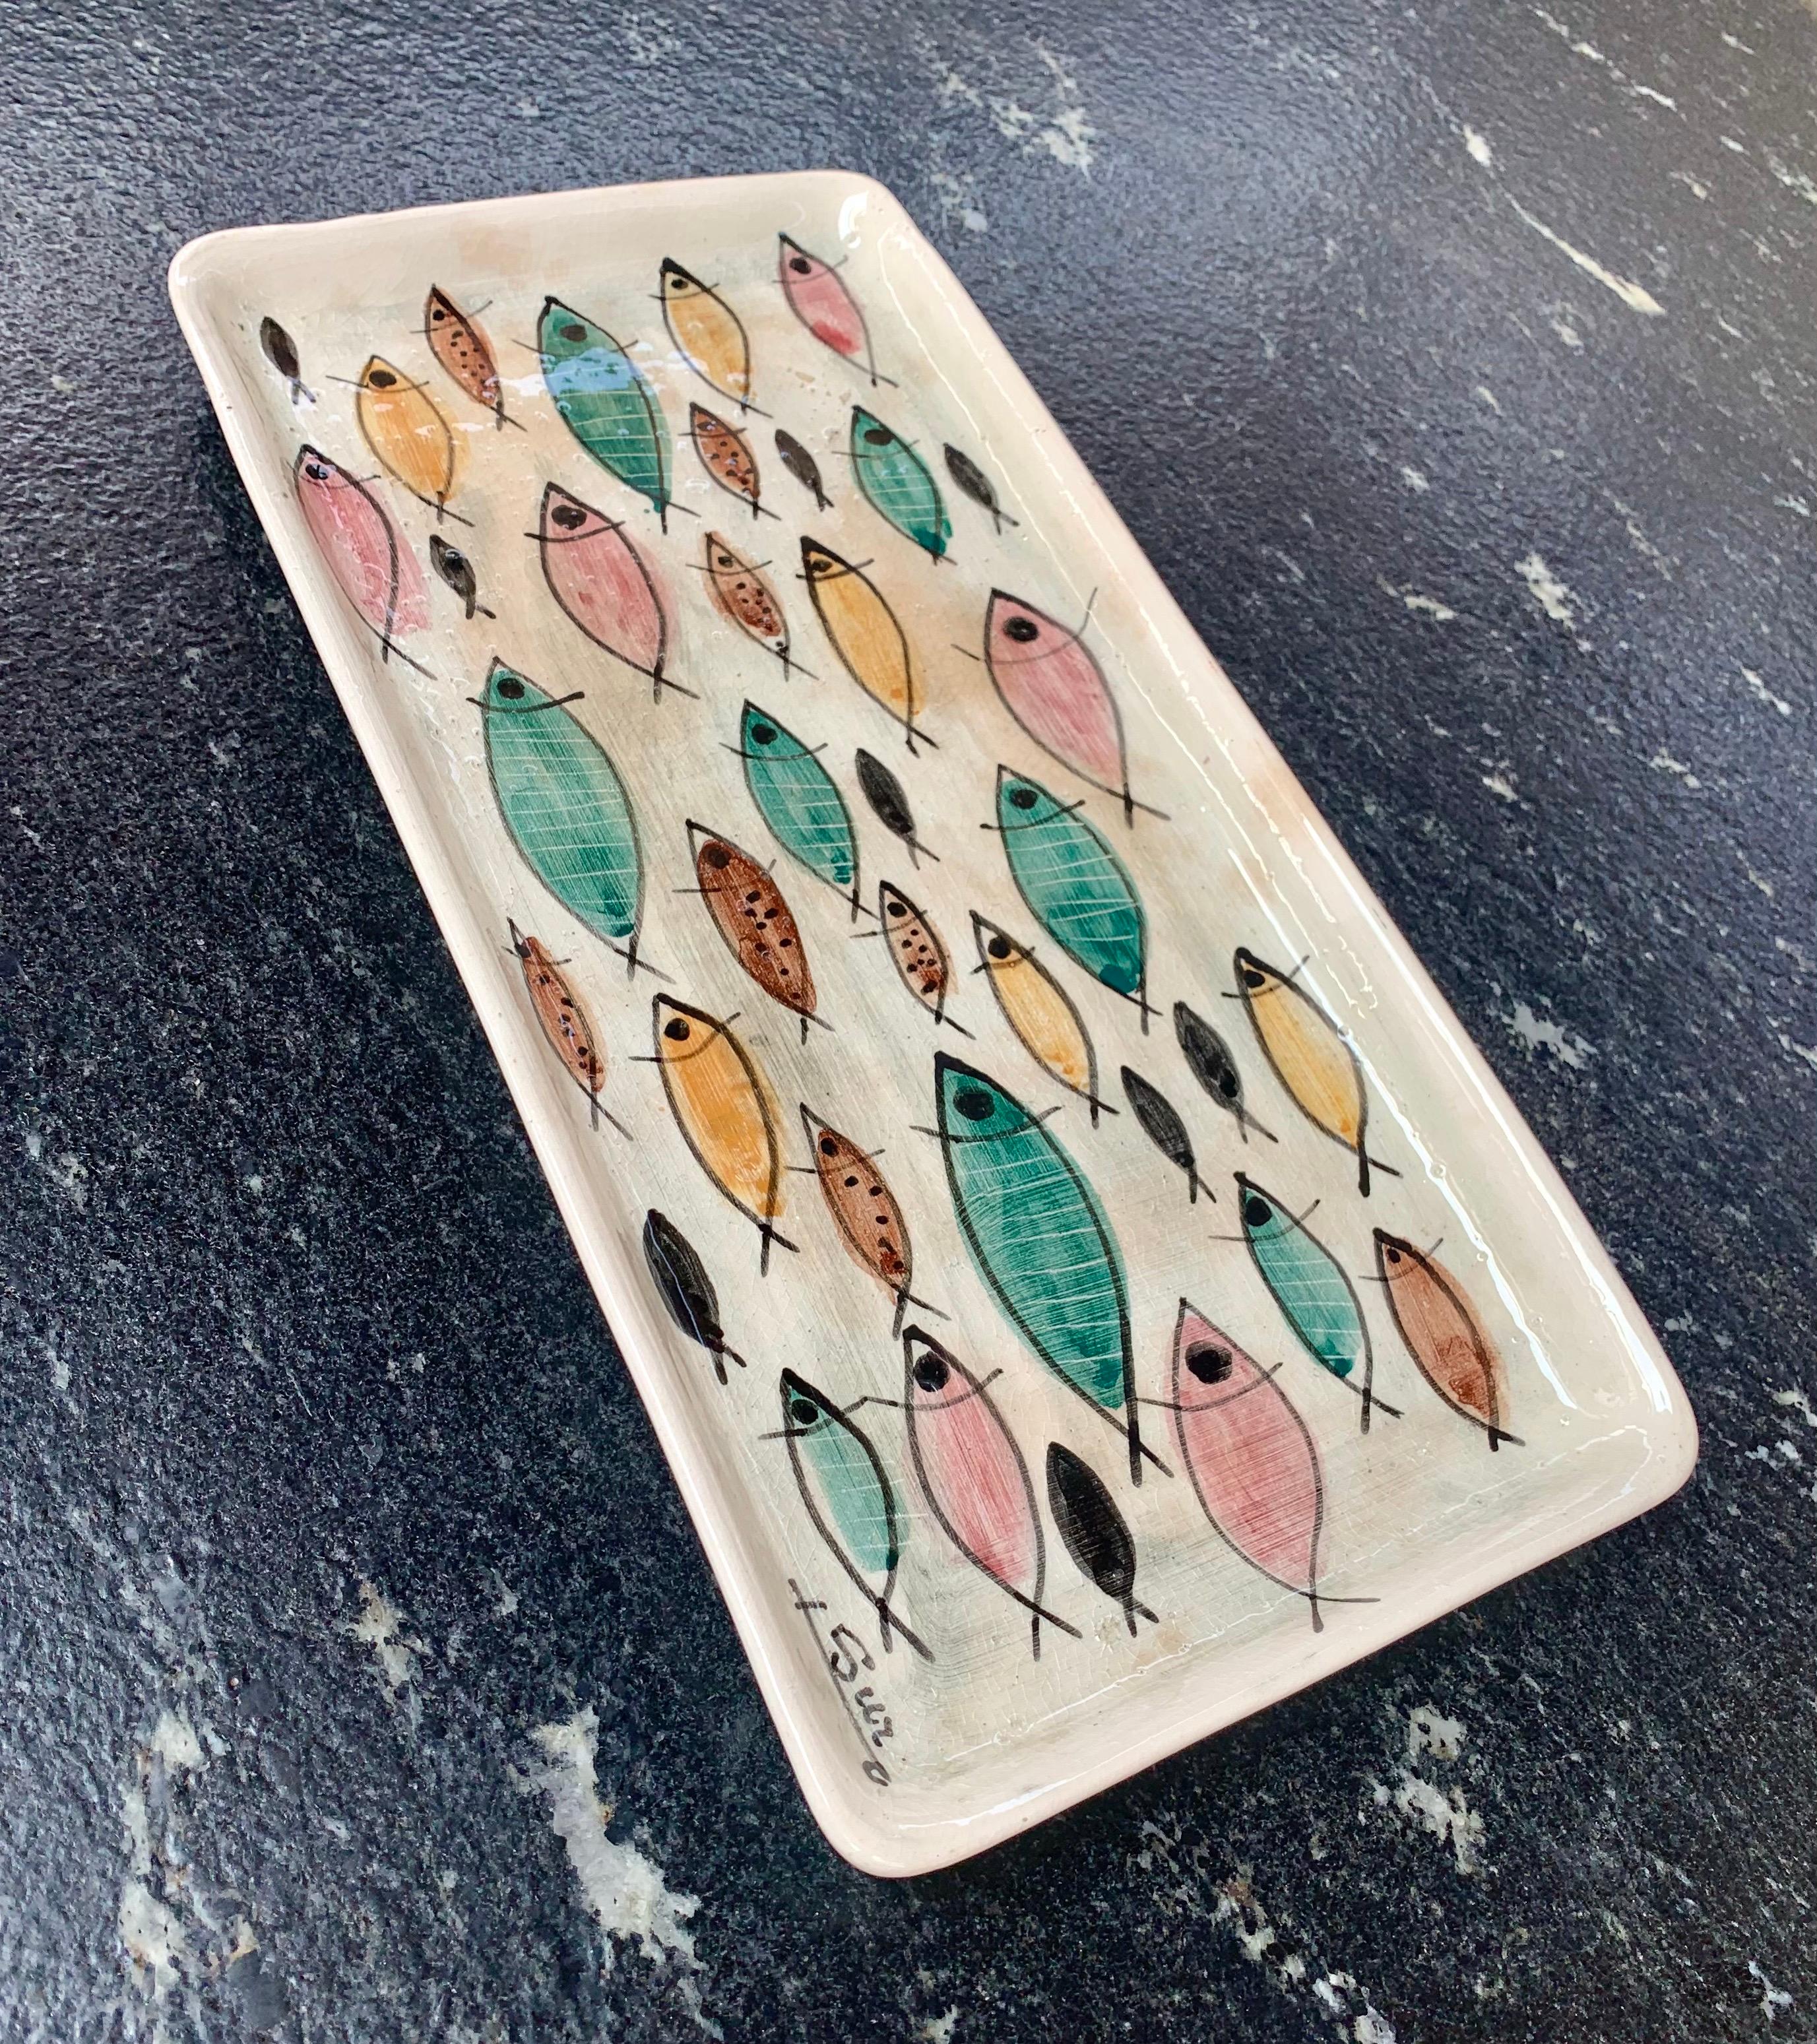 Exquisite glazed ceramic dish in various shades and colors with the iconic fish of the Mid-Century Modern has a unique personality. Designed and hand painted by Mexican ceramist and artist Noe Suro at his Workshop in Tlaquepaque, Jalisco, in the